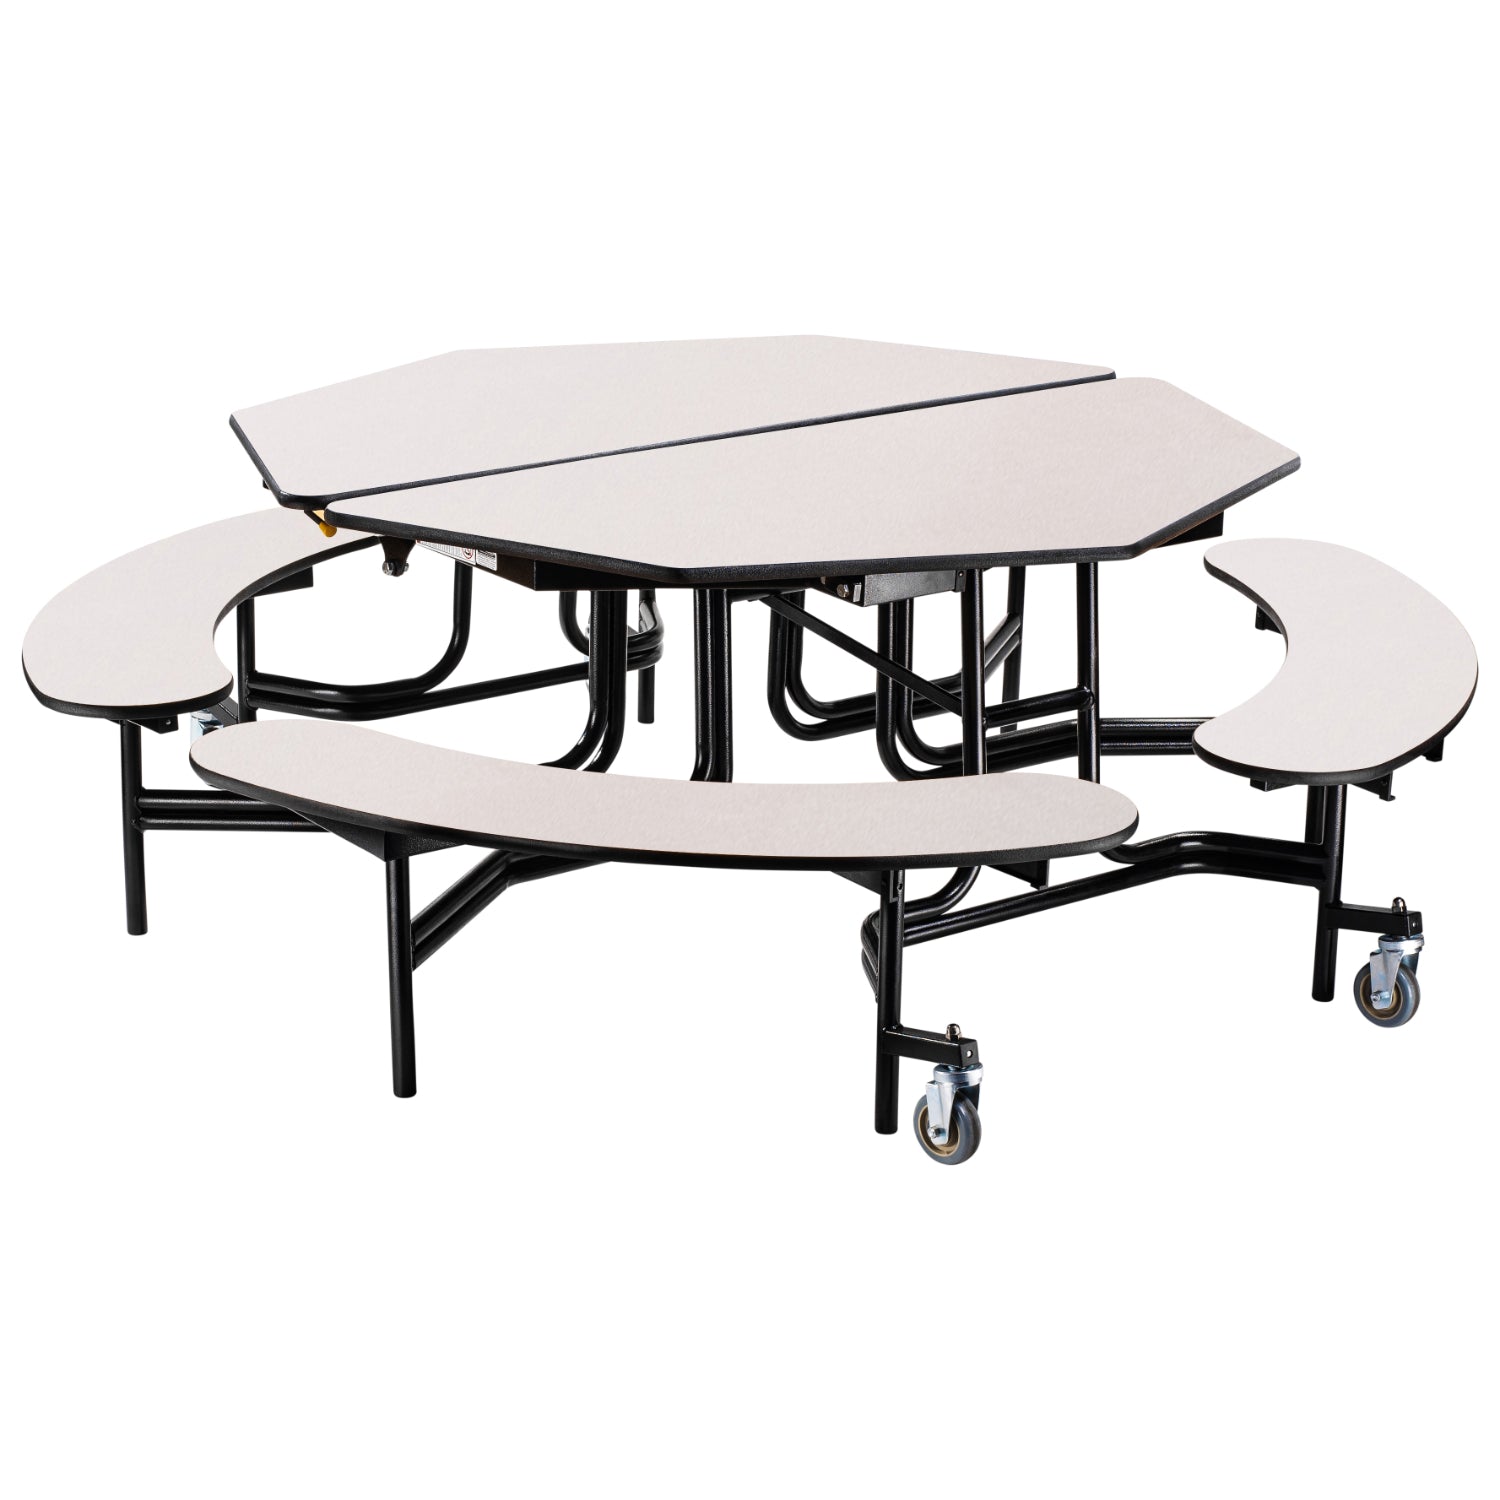 Mobile Cafeteria Table with Benches, 60" Octagon, MDF Core, Black ProtectEdge, Textured Black Frame